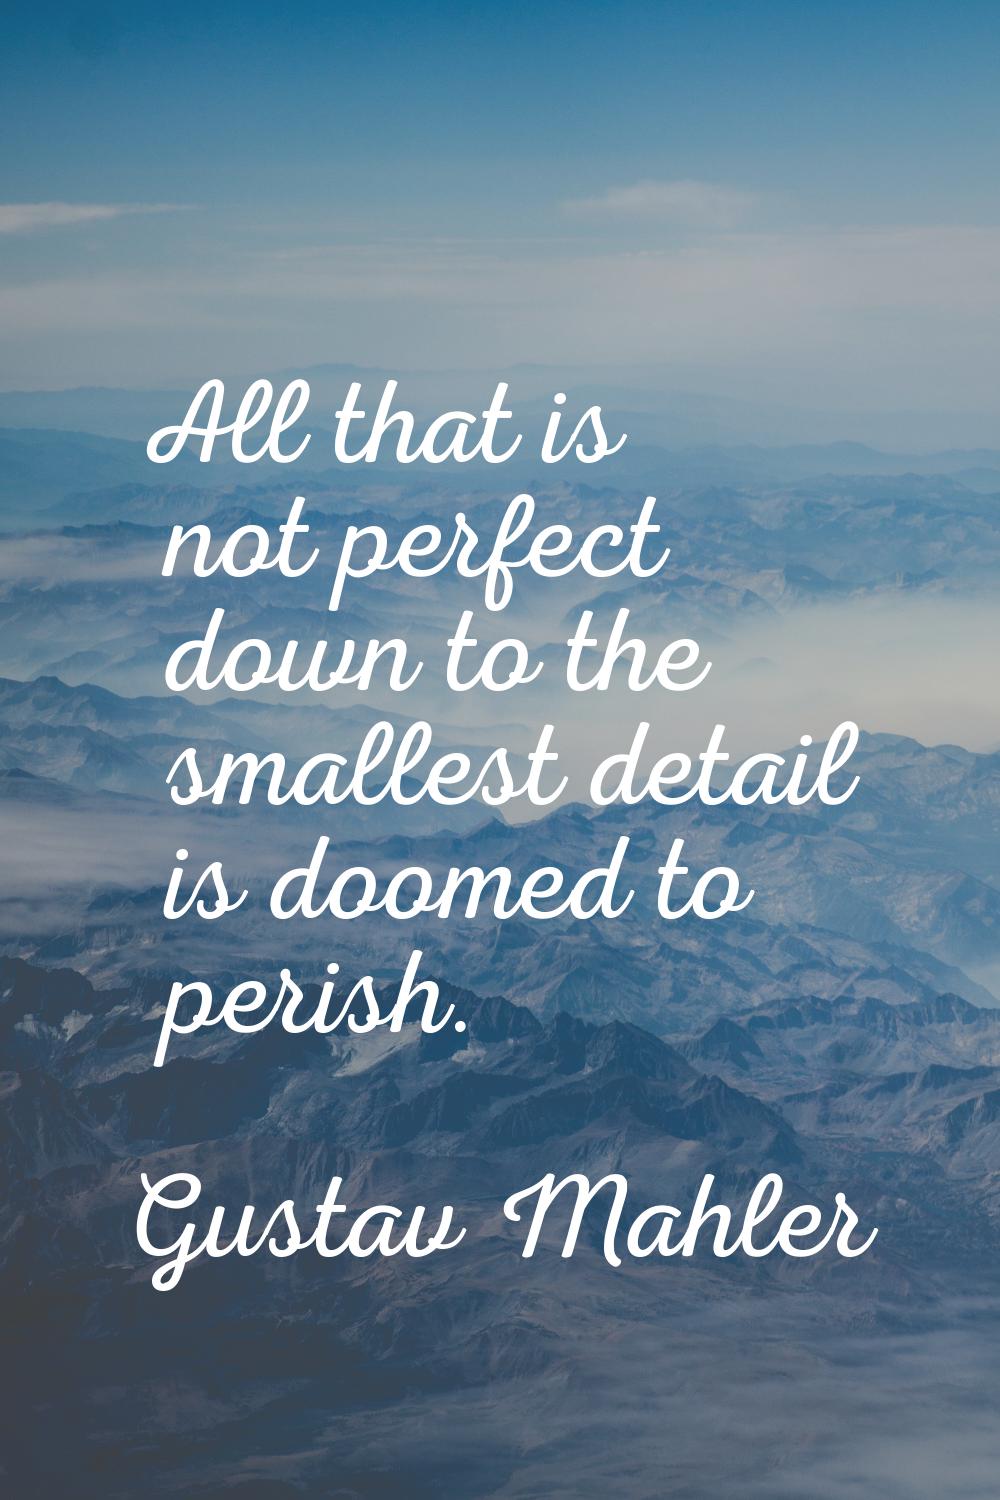 All that is not perfect down to the smallest detail is doomed to perish.